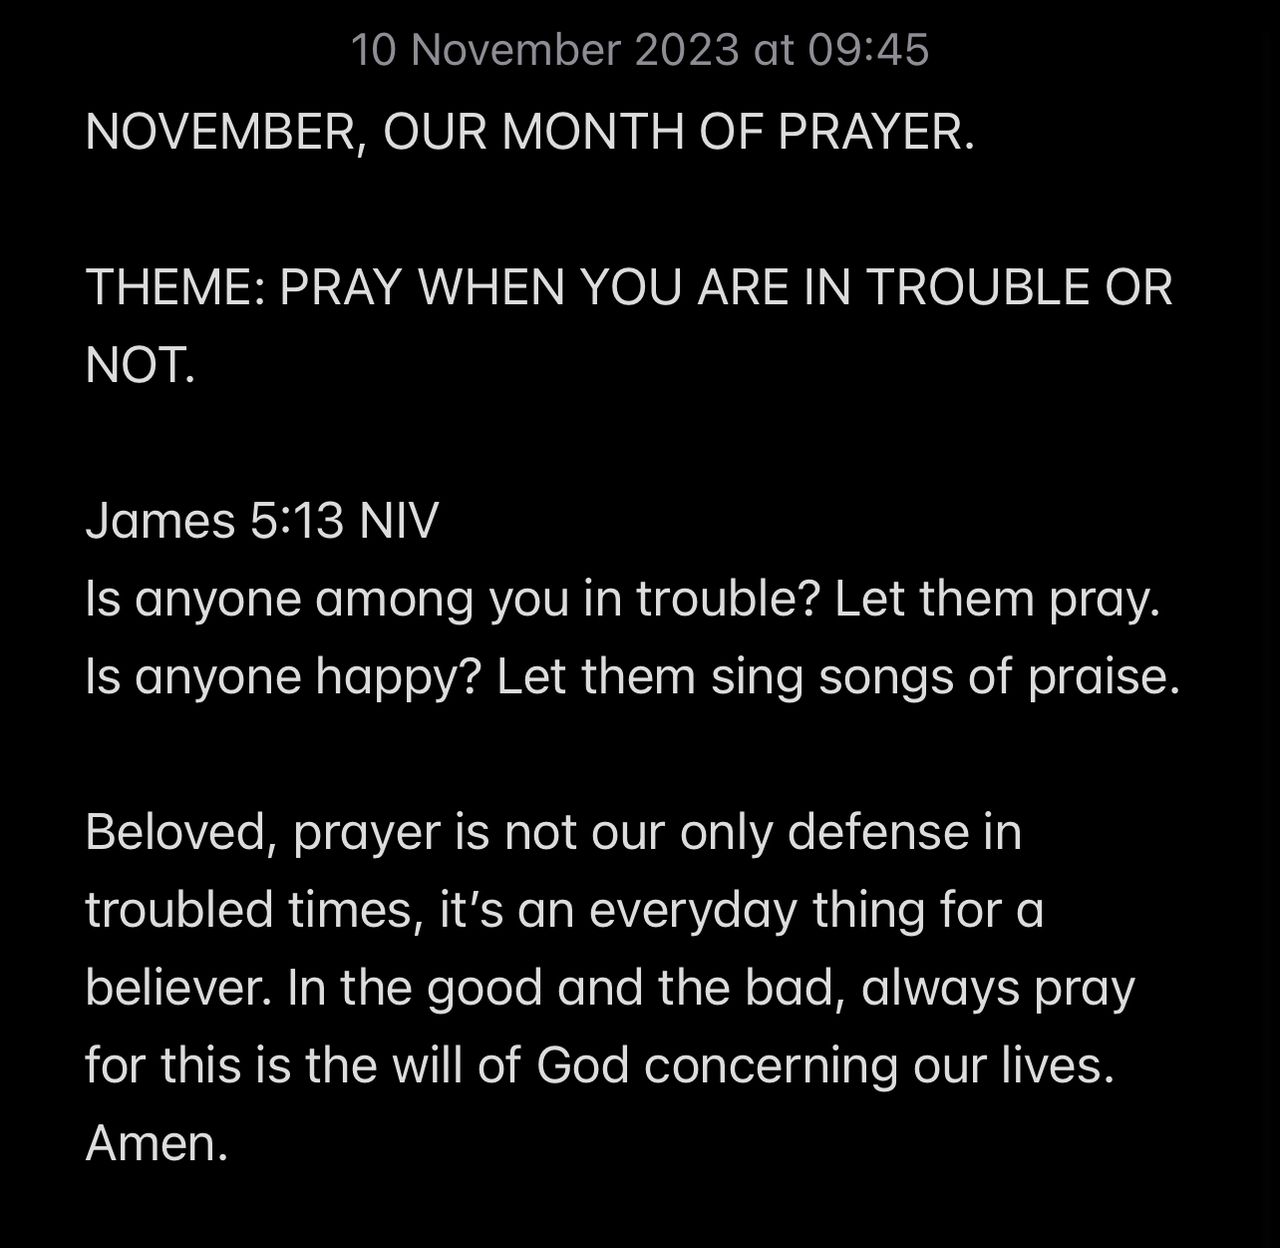 PRAY WHEN YOU ARE IN TROUBLE OR NOT.